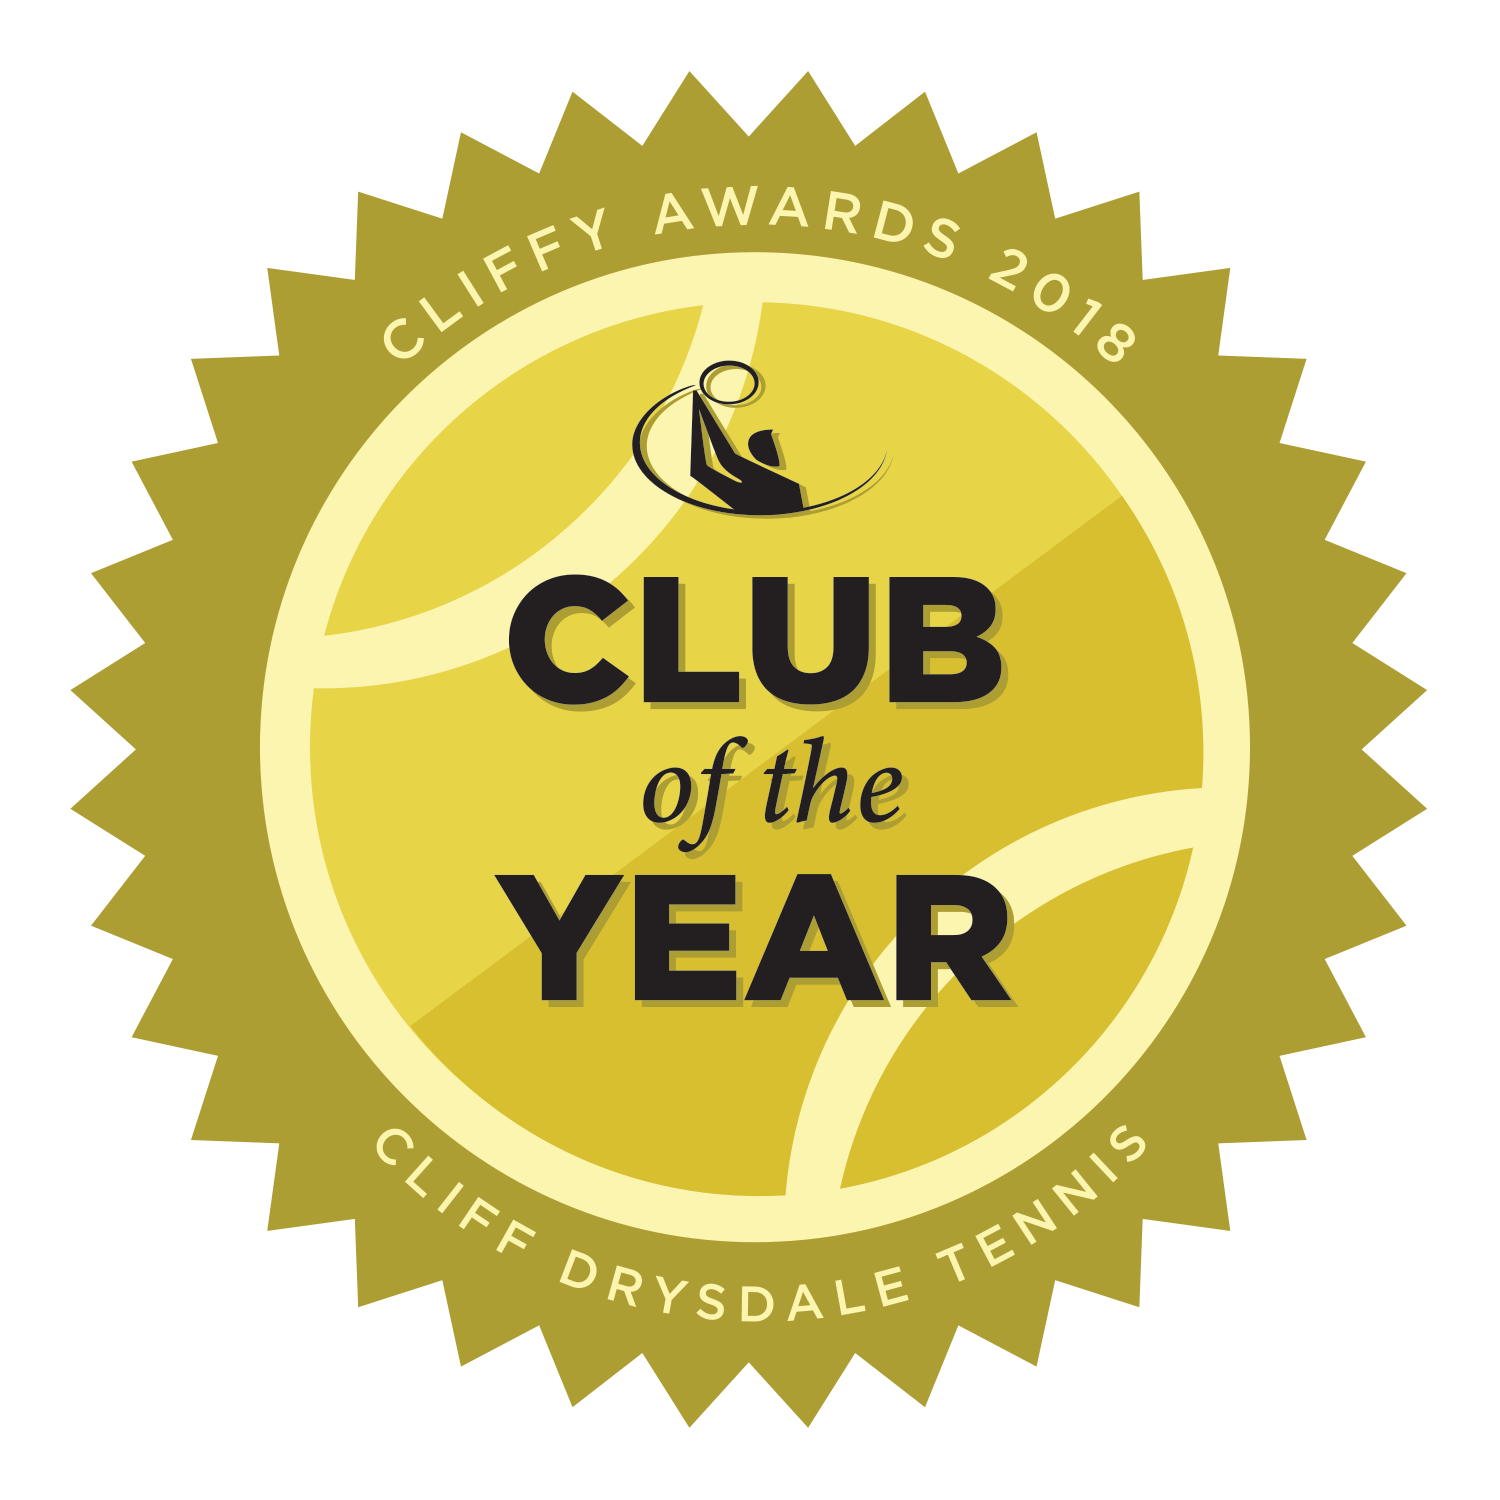 Drysdales Logo - Red Ledges wins Club of the Year award from Cliff Drysdale Tennis ...